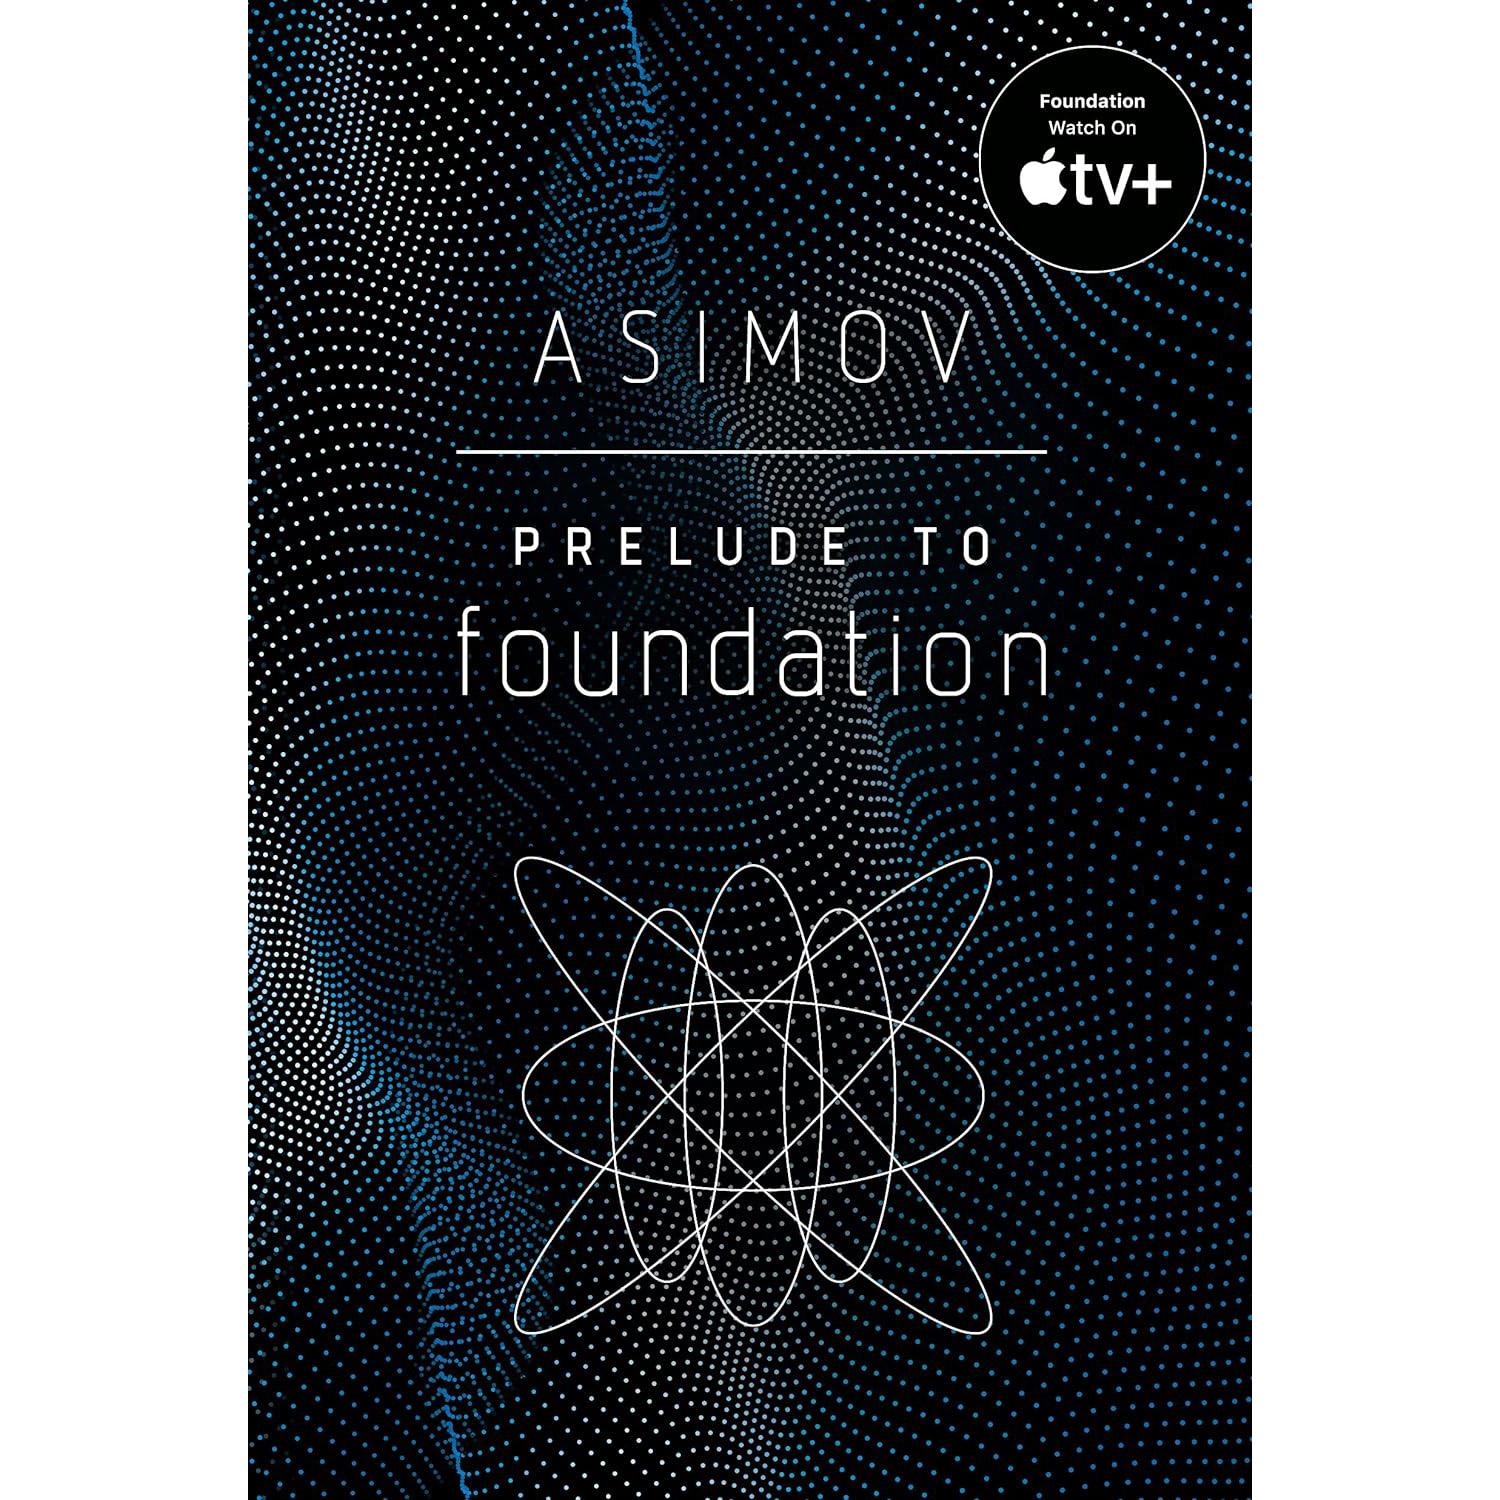 Prelude to Foundation eBook for $1.99